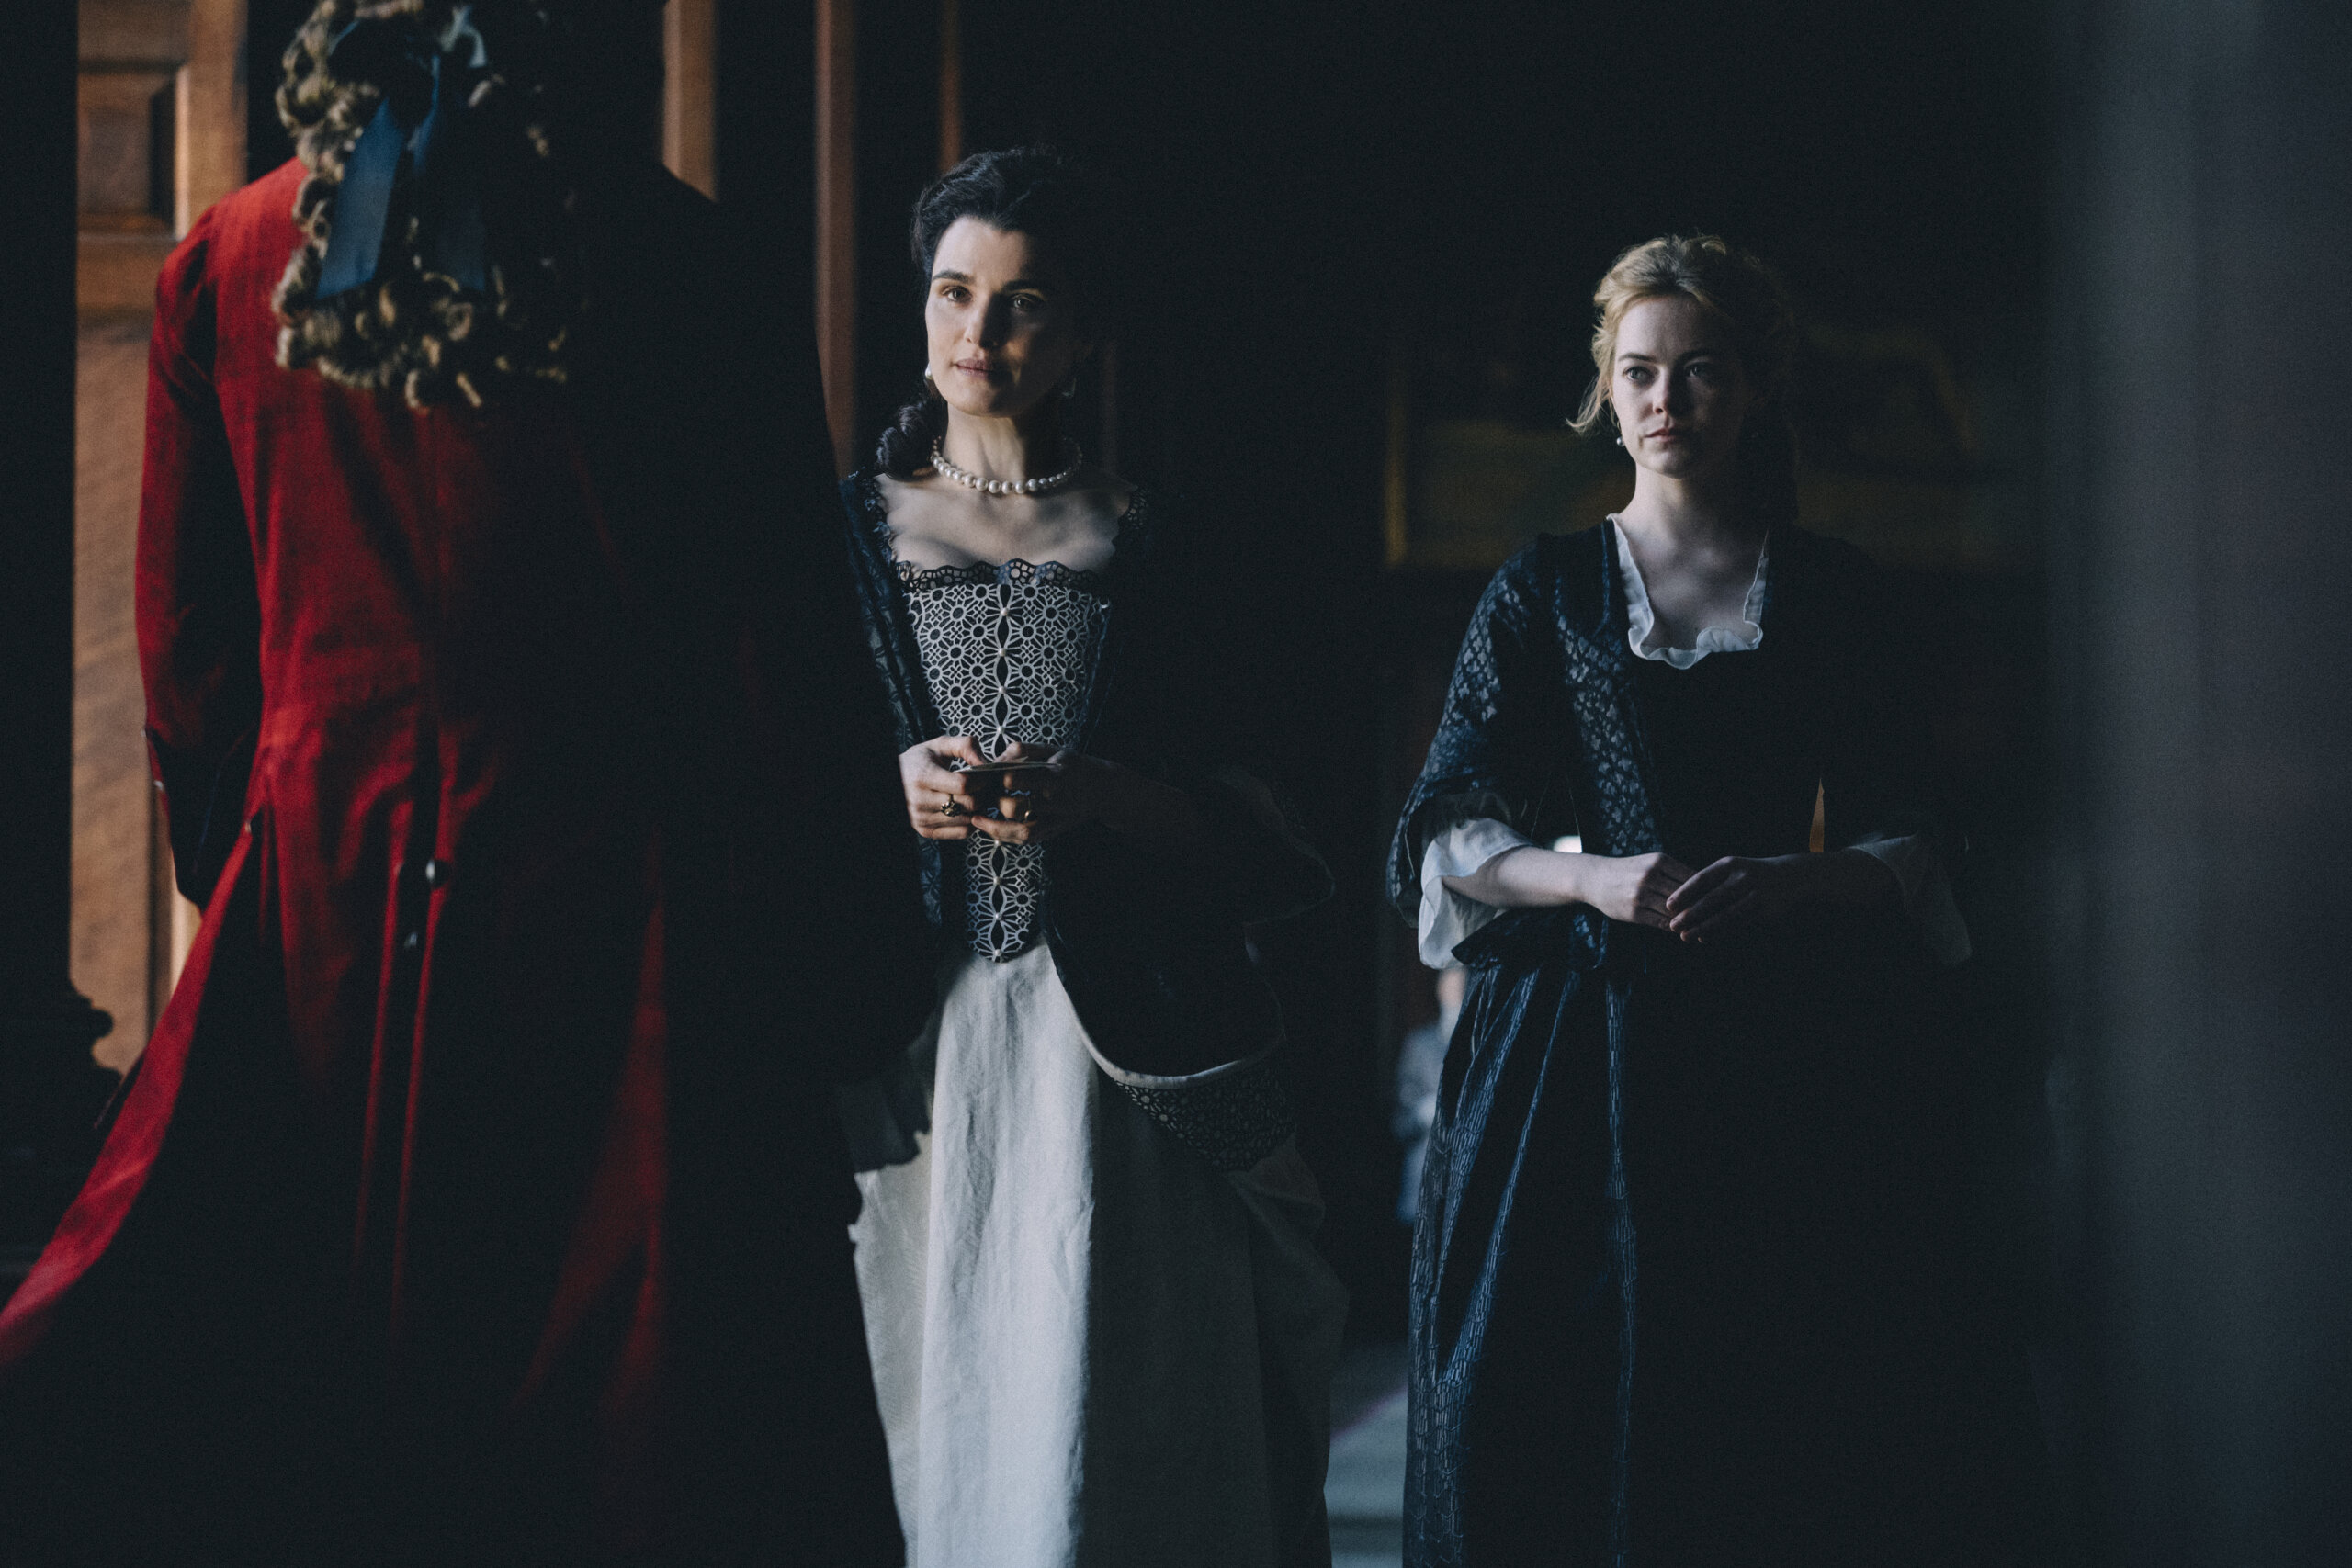 Rachel Weisz and Emma Stone in the film THE FAVOURITE. Photo by Atsushi Nishijima. © 2018 Twentieth Century Fox Film Corporation All Rights Reserved